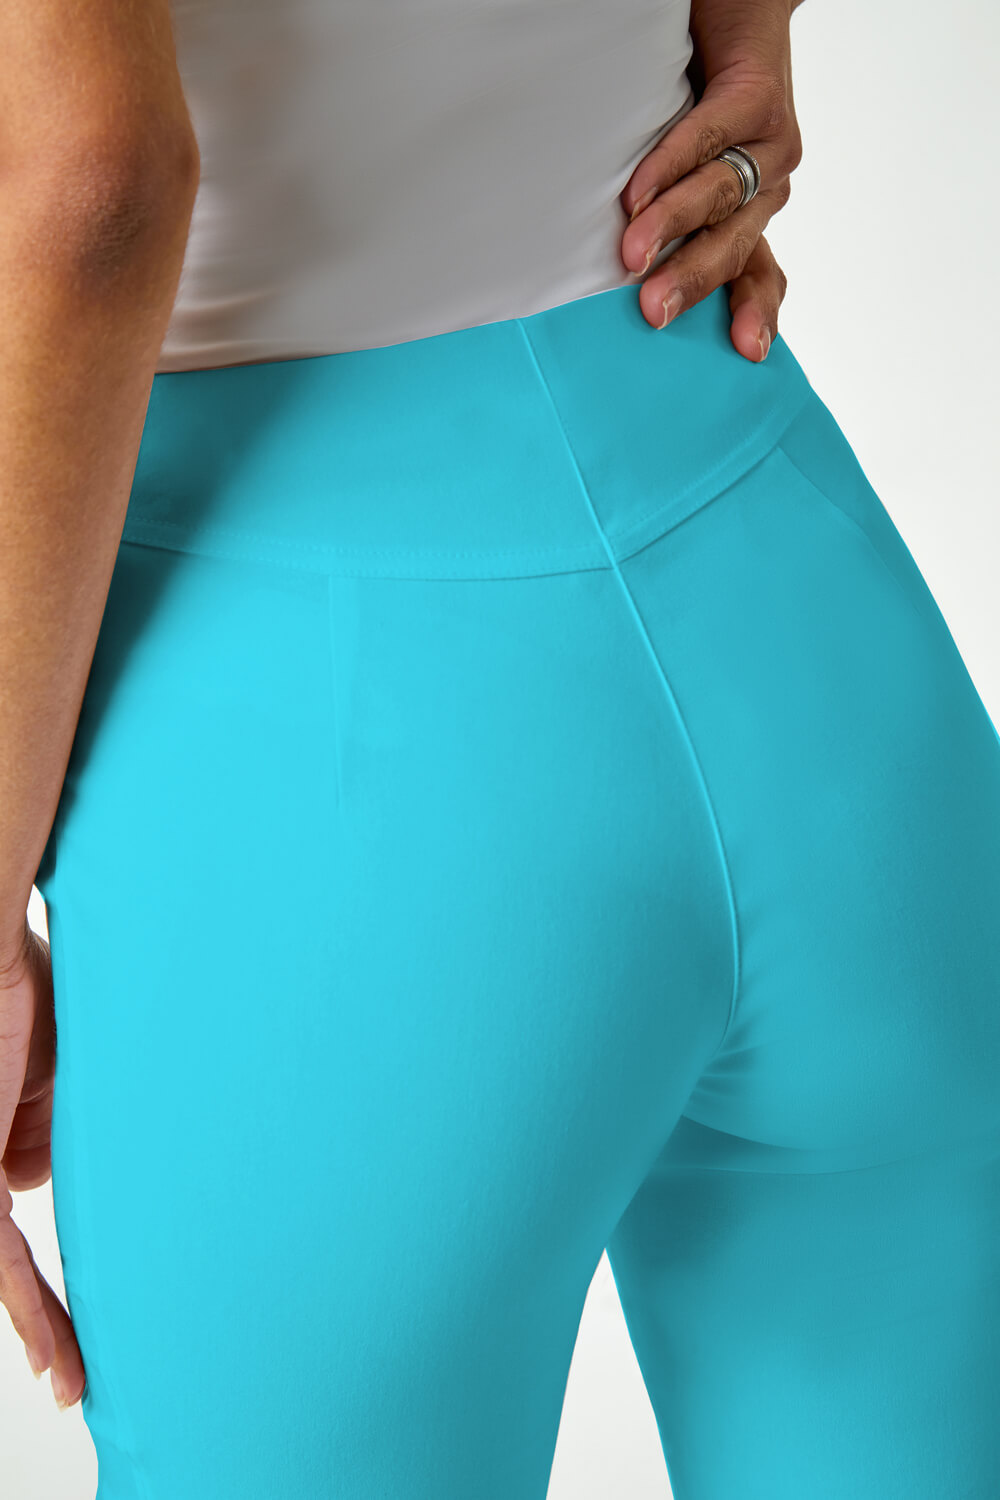 Knee Length Stretch Shorts in Turquoise - Roman Originals UK